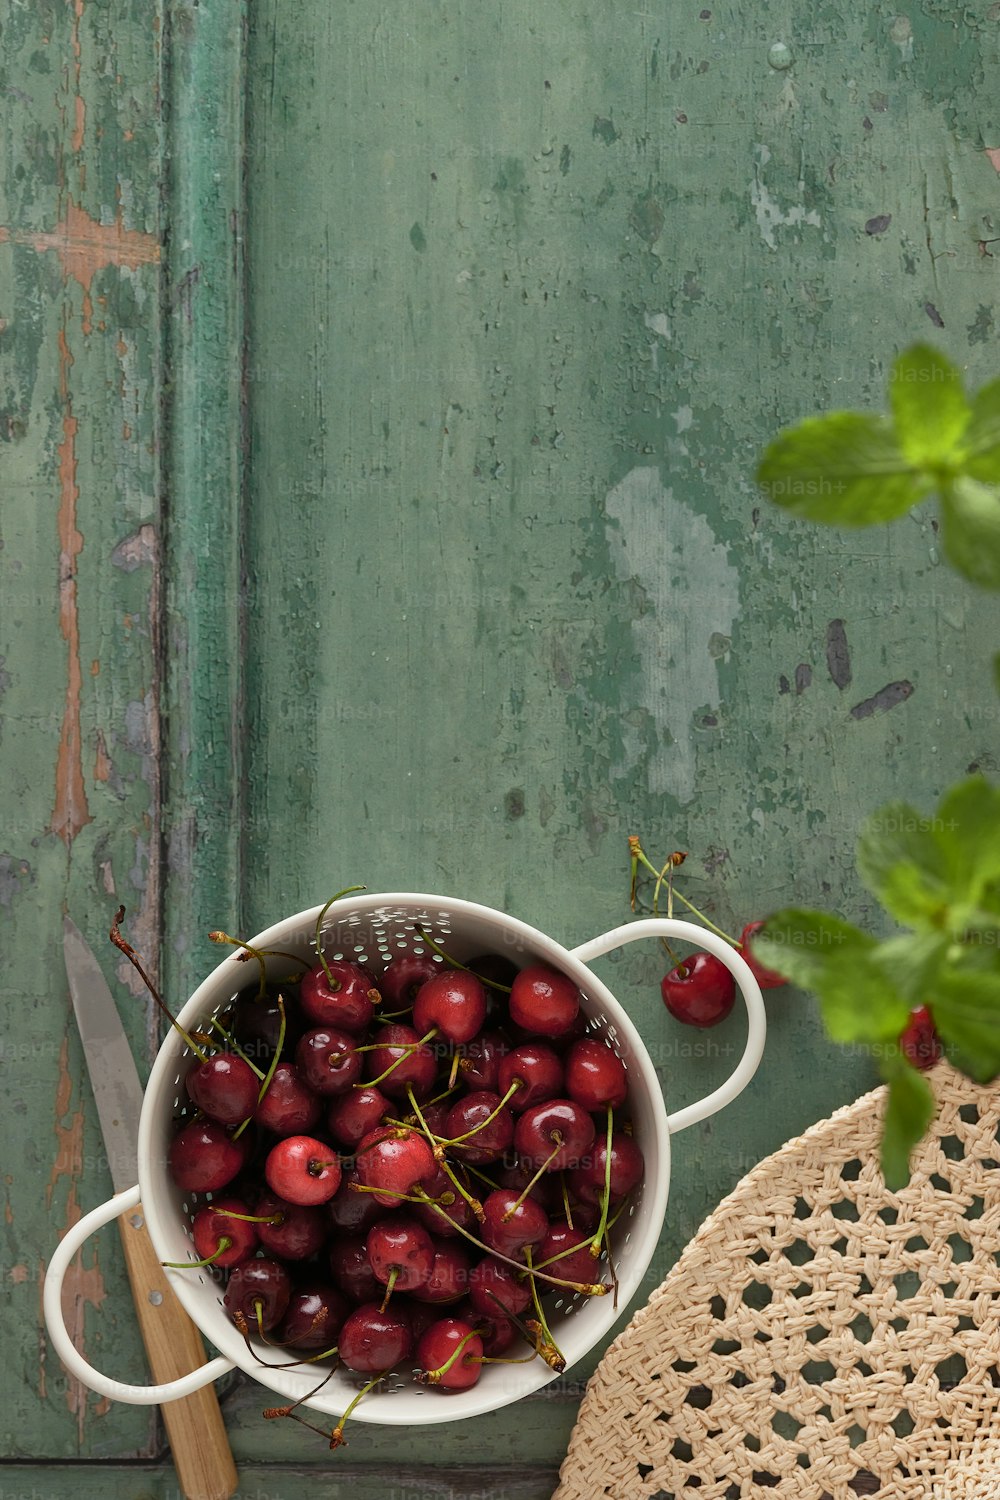 a bowl of cherries on a table next to a potted plant